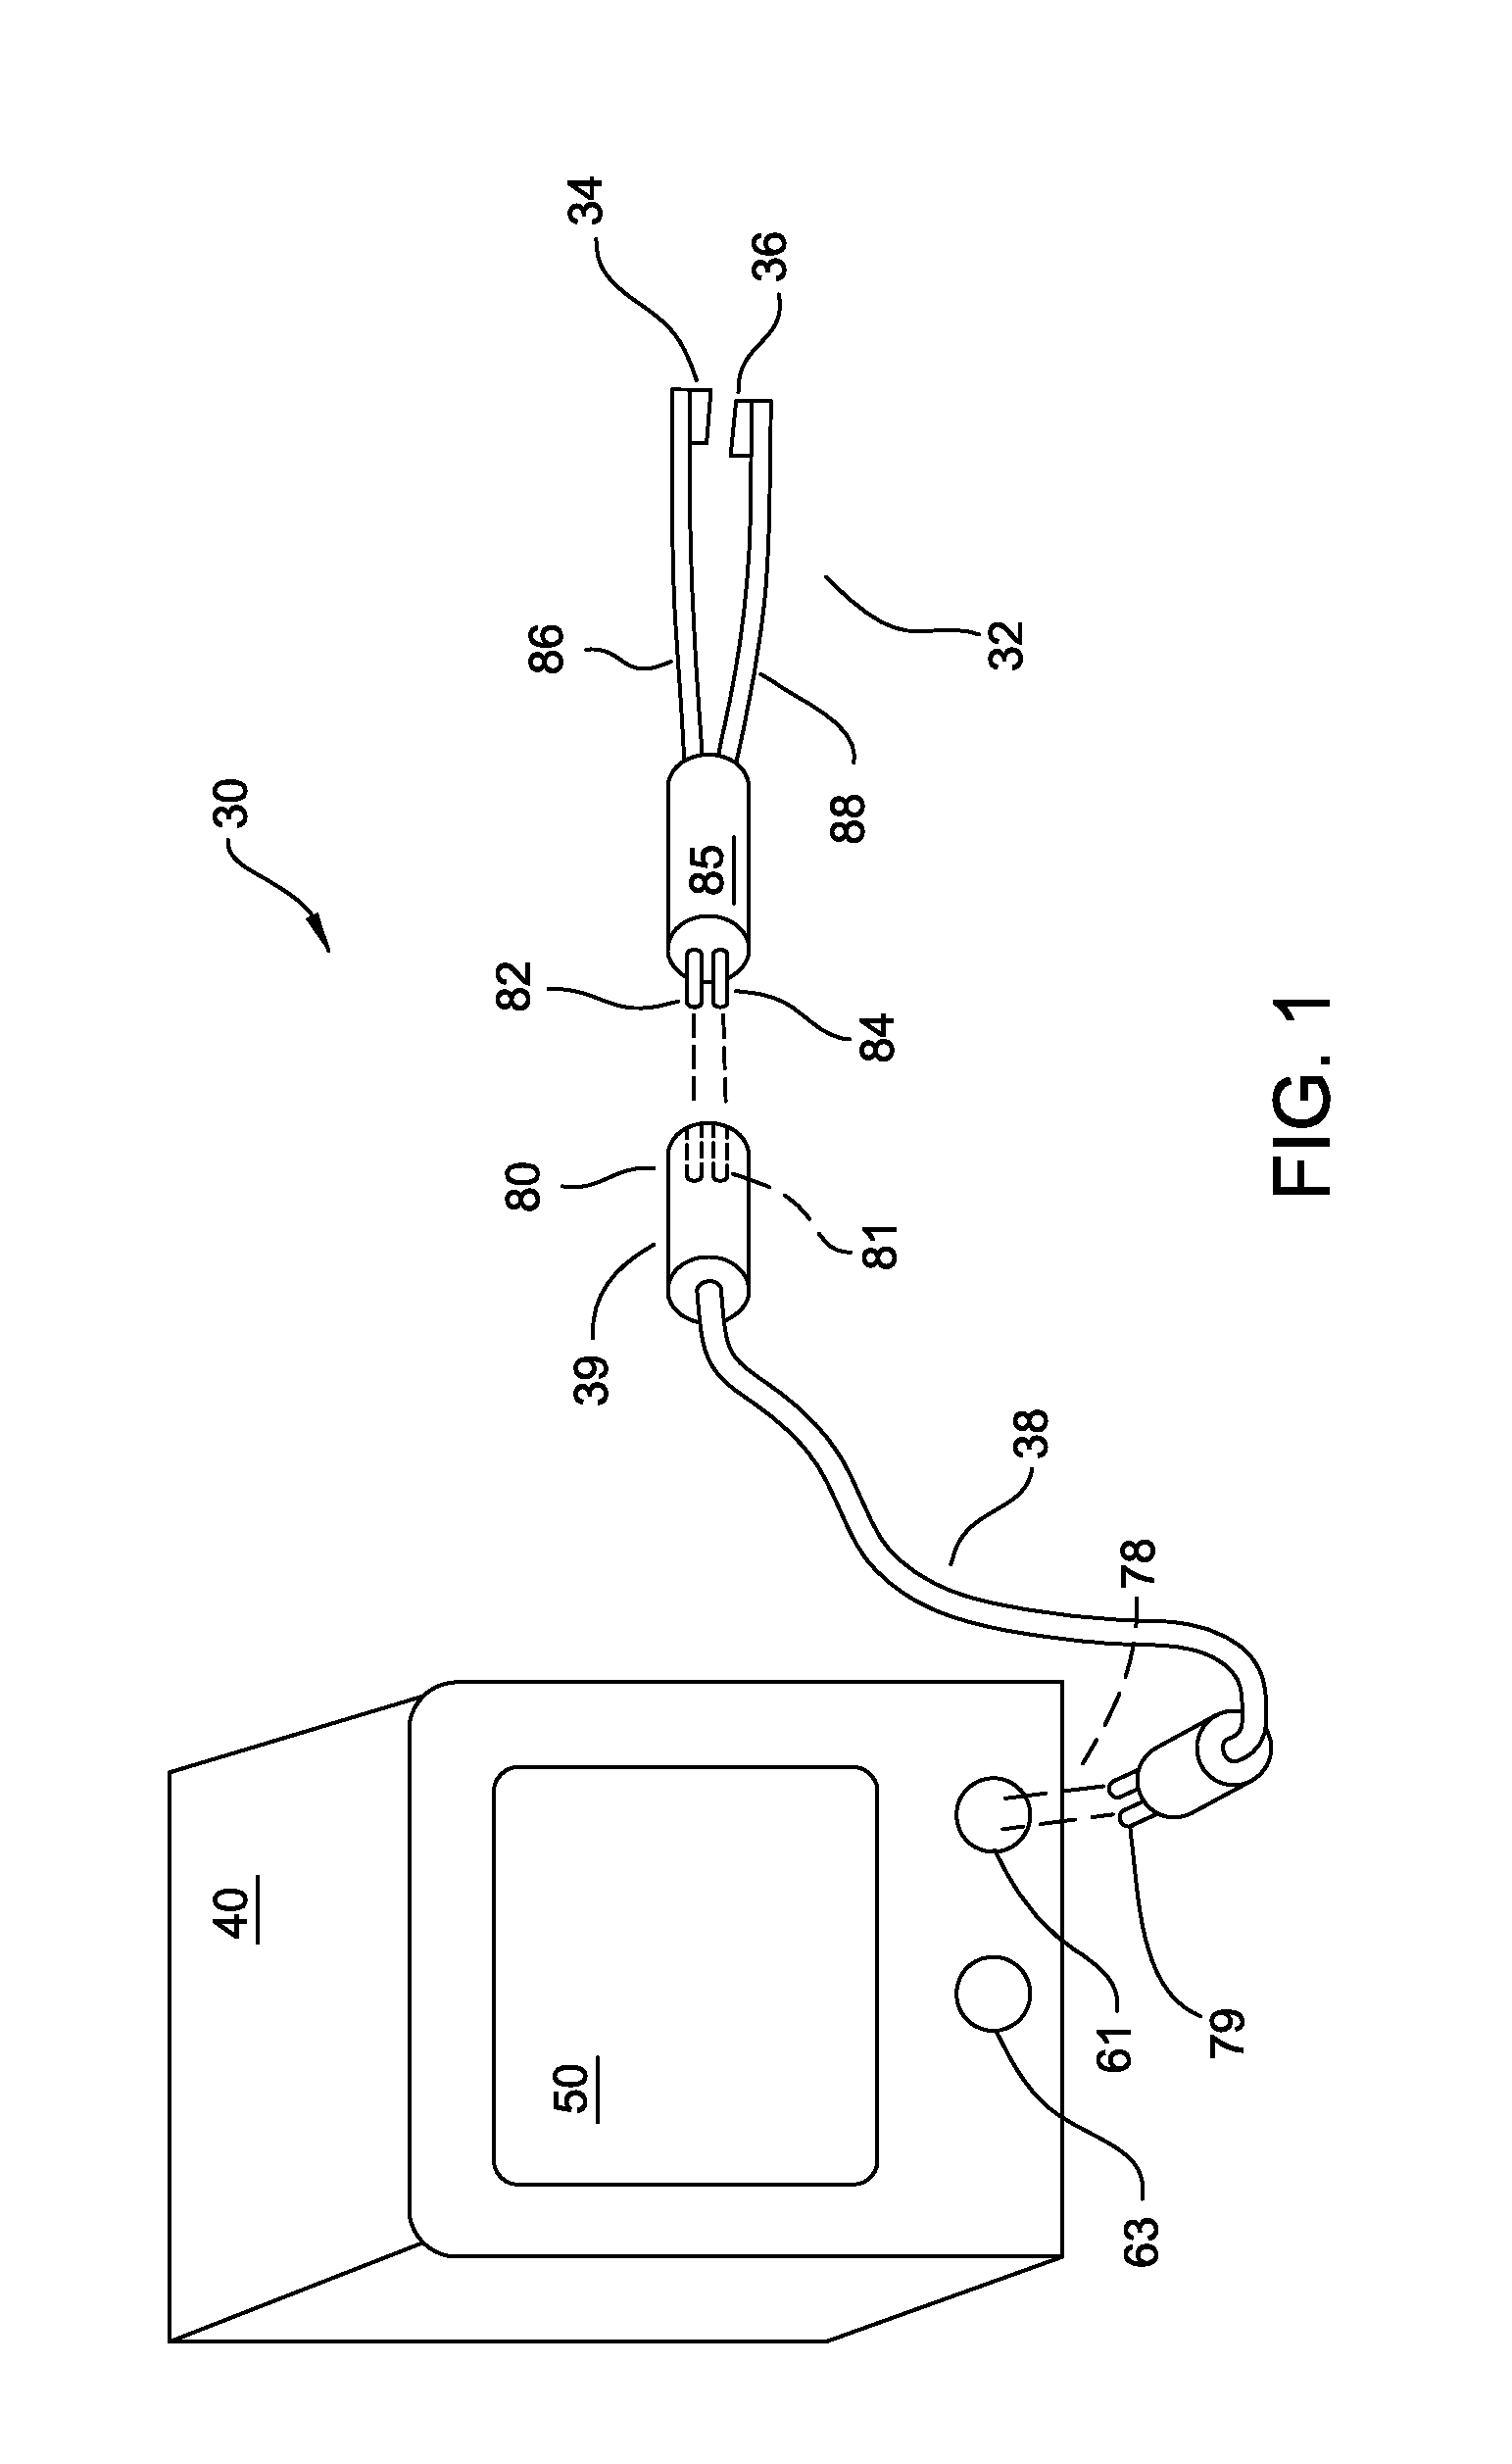 Powered surgical tool with an isolation circuit connected between the tool power terminals and the memory internal to the tool